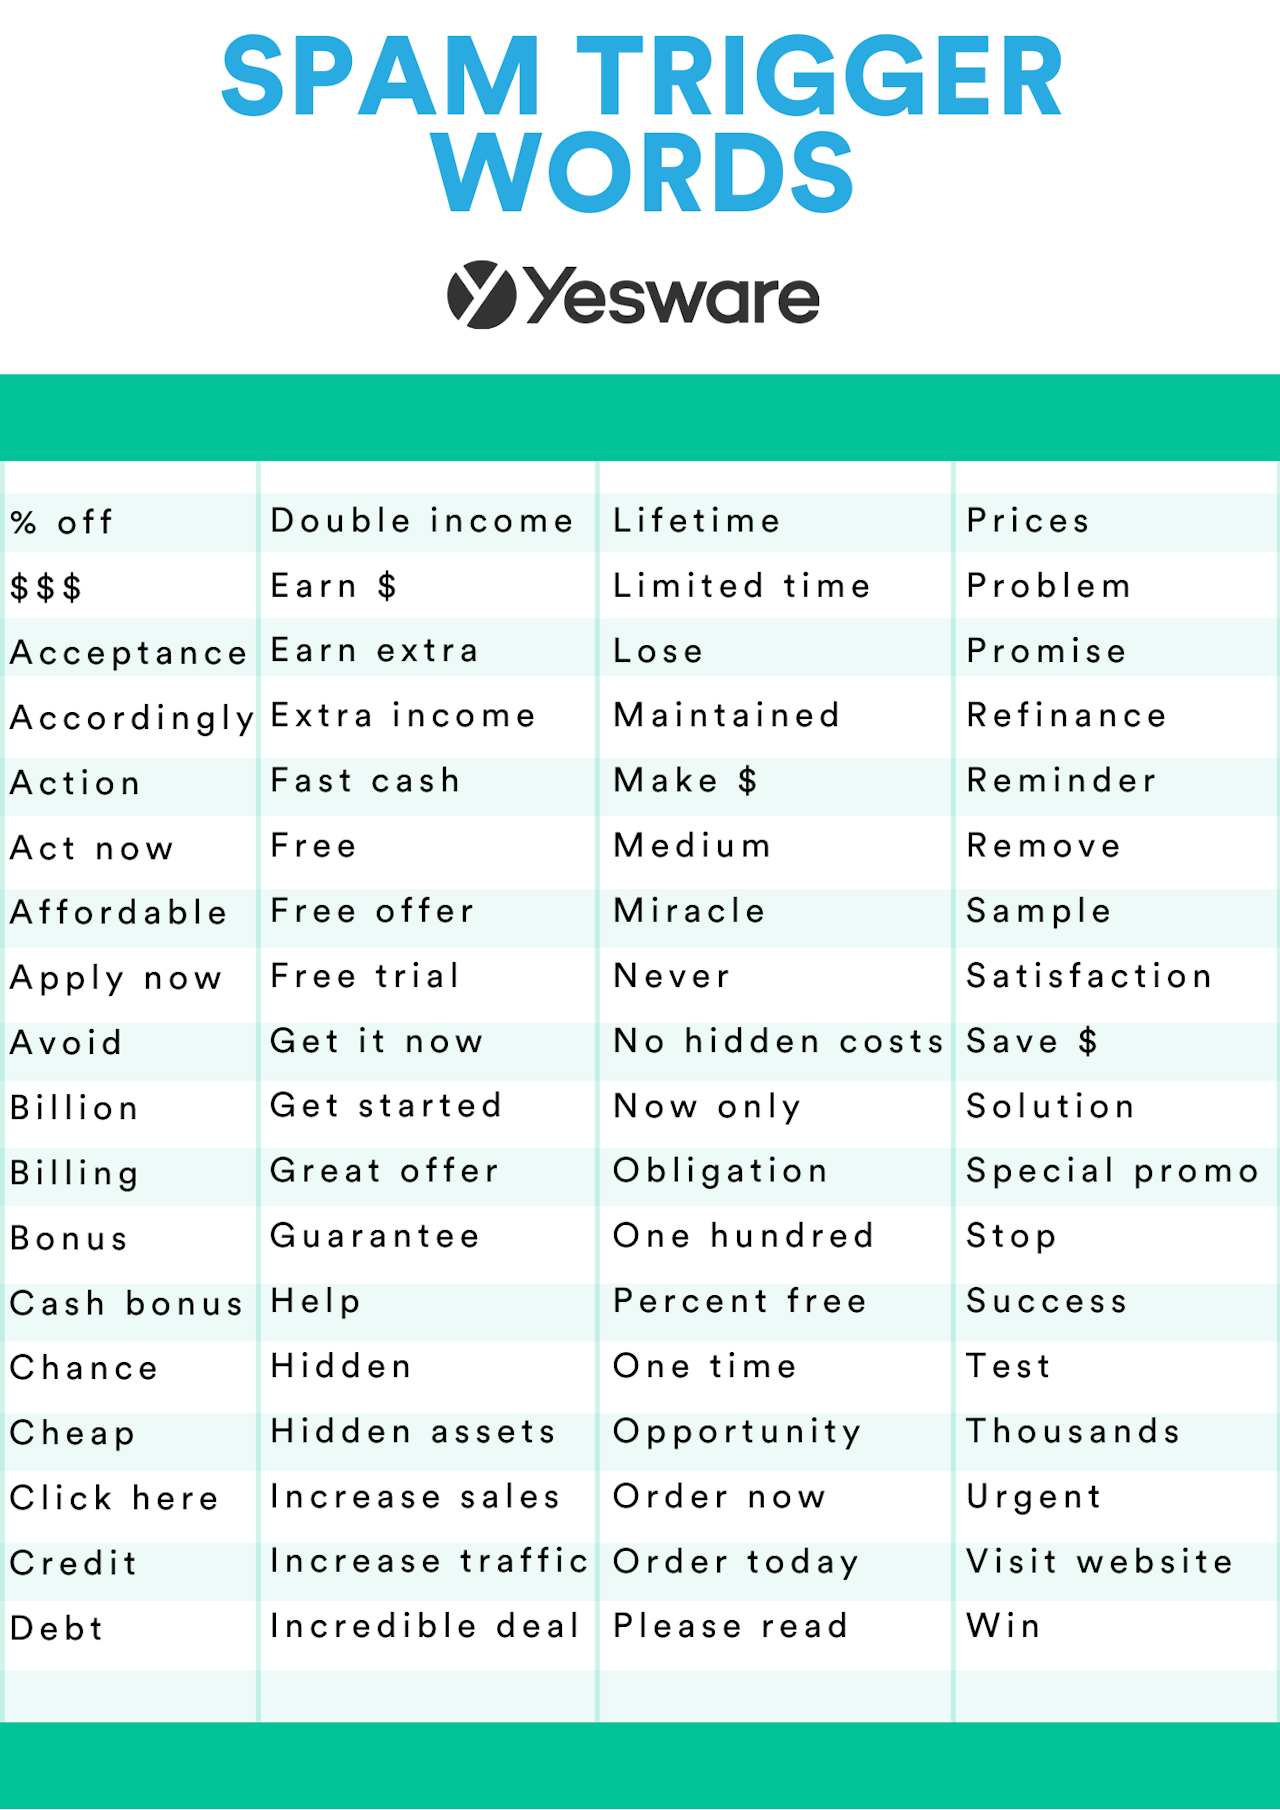 Yesware data: Spam Trigger Words